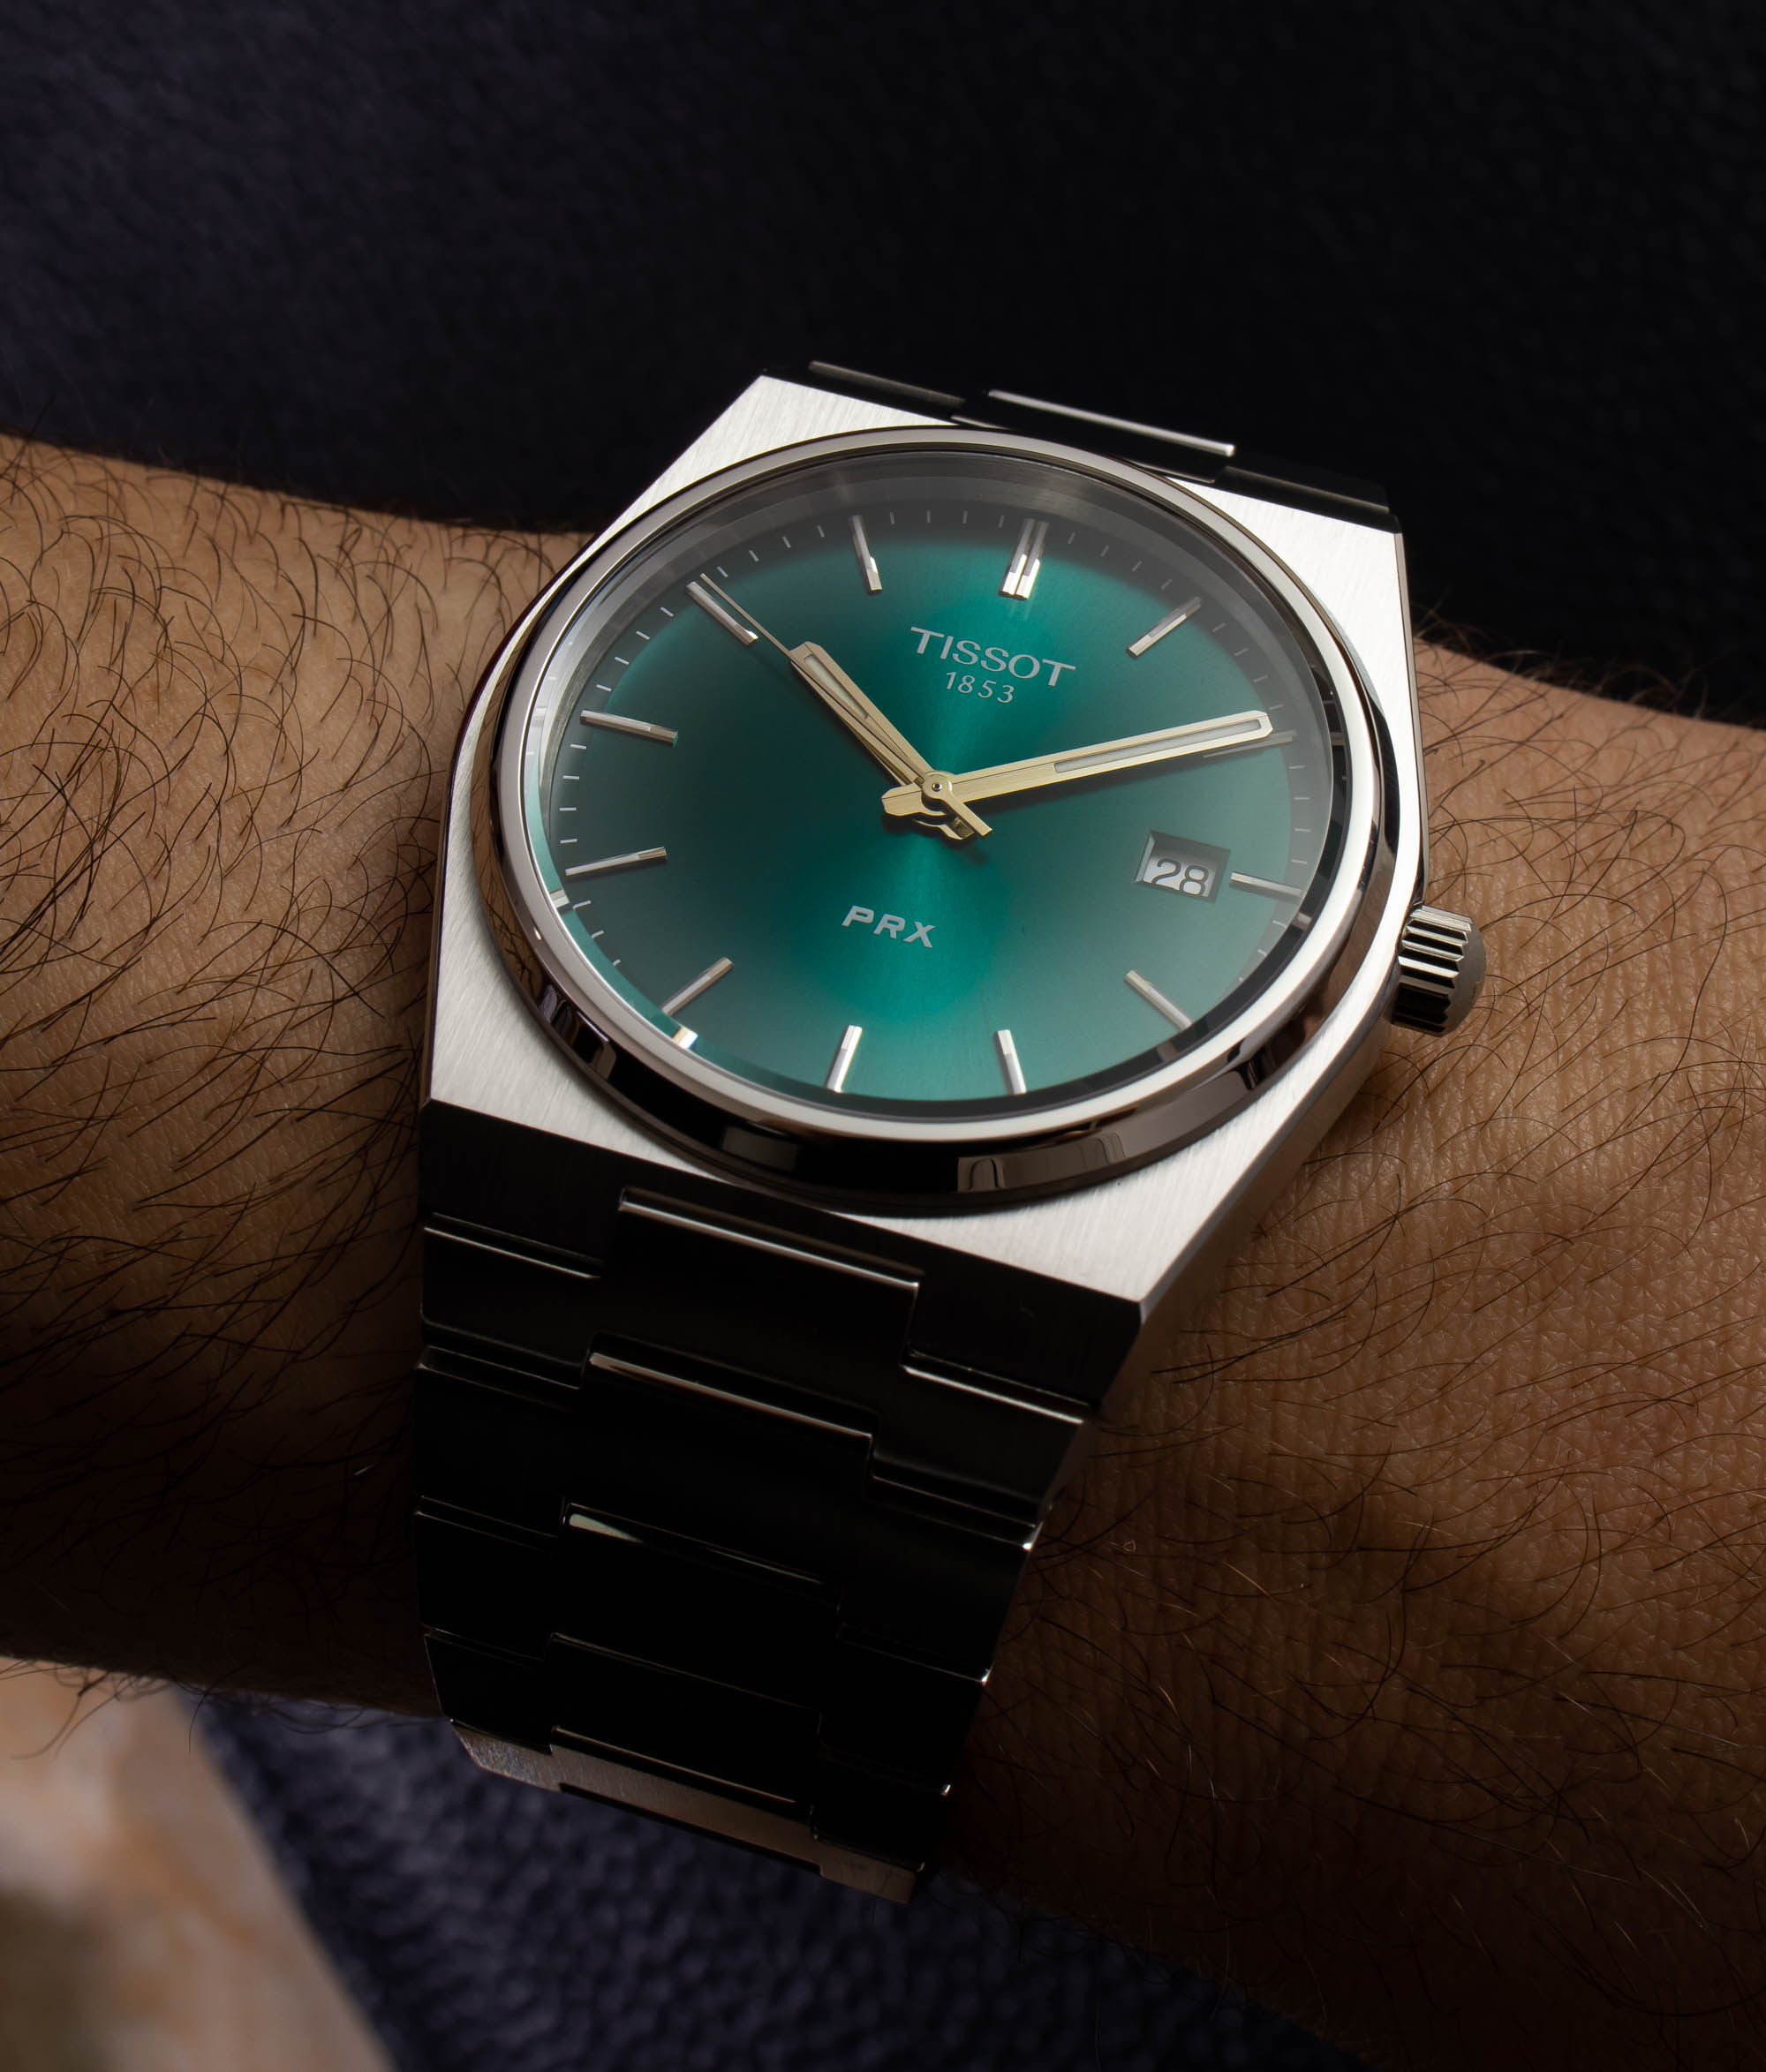 Hands-On: Tissot PRX Green Dial Watches 35mm Vs. 40mm Models